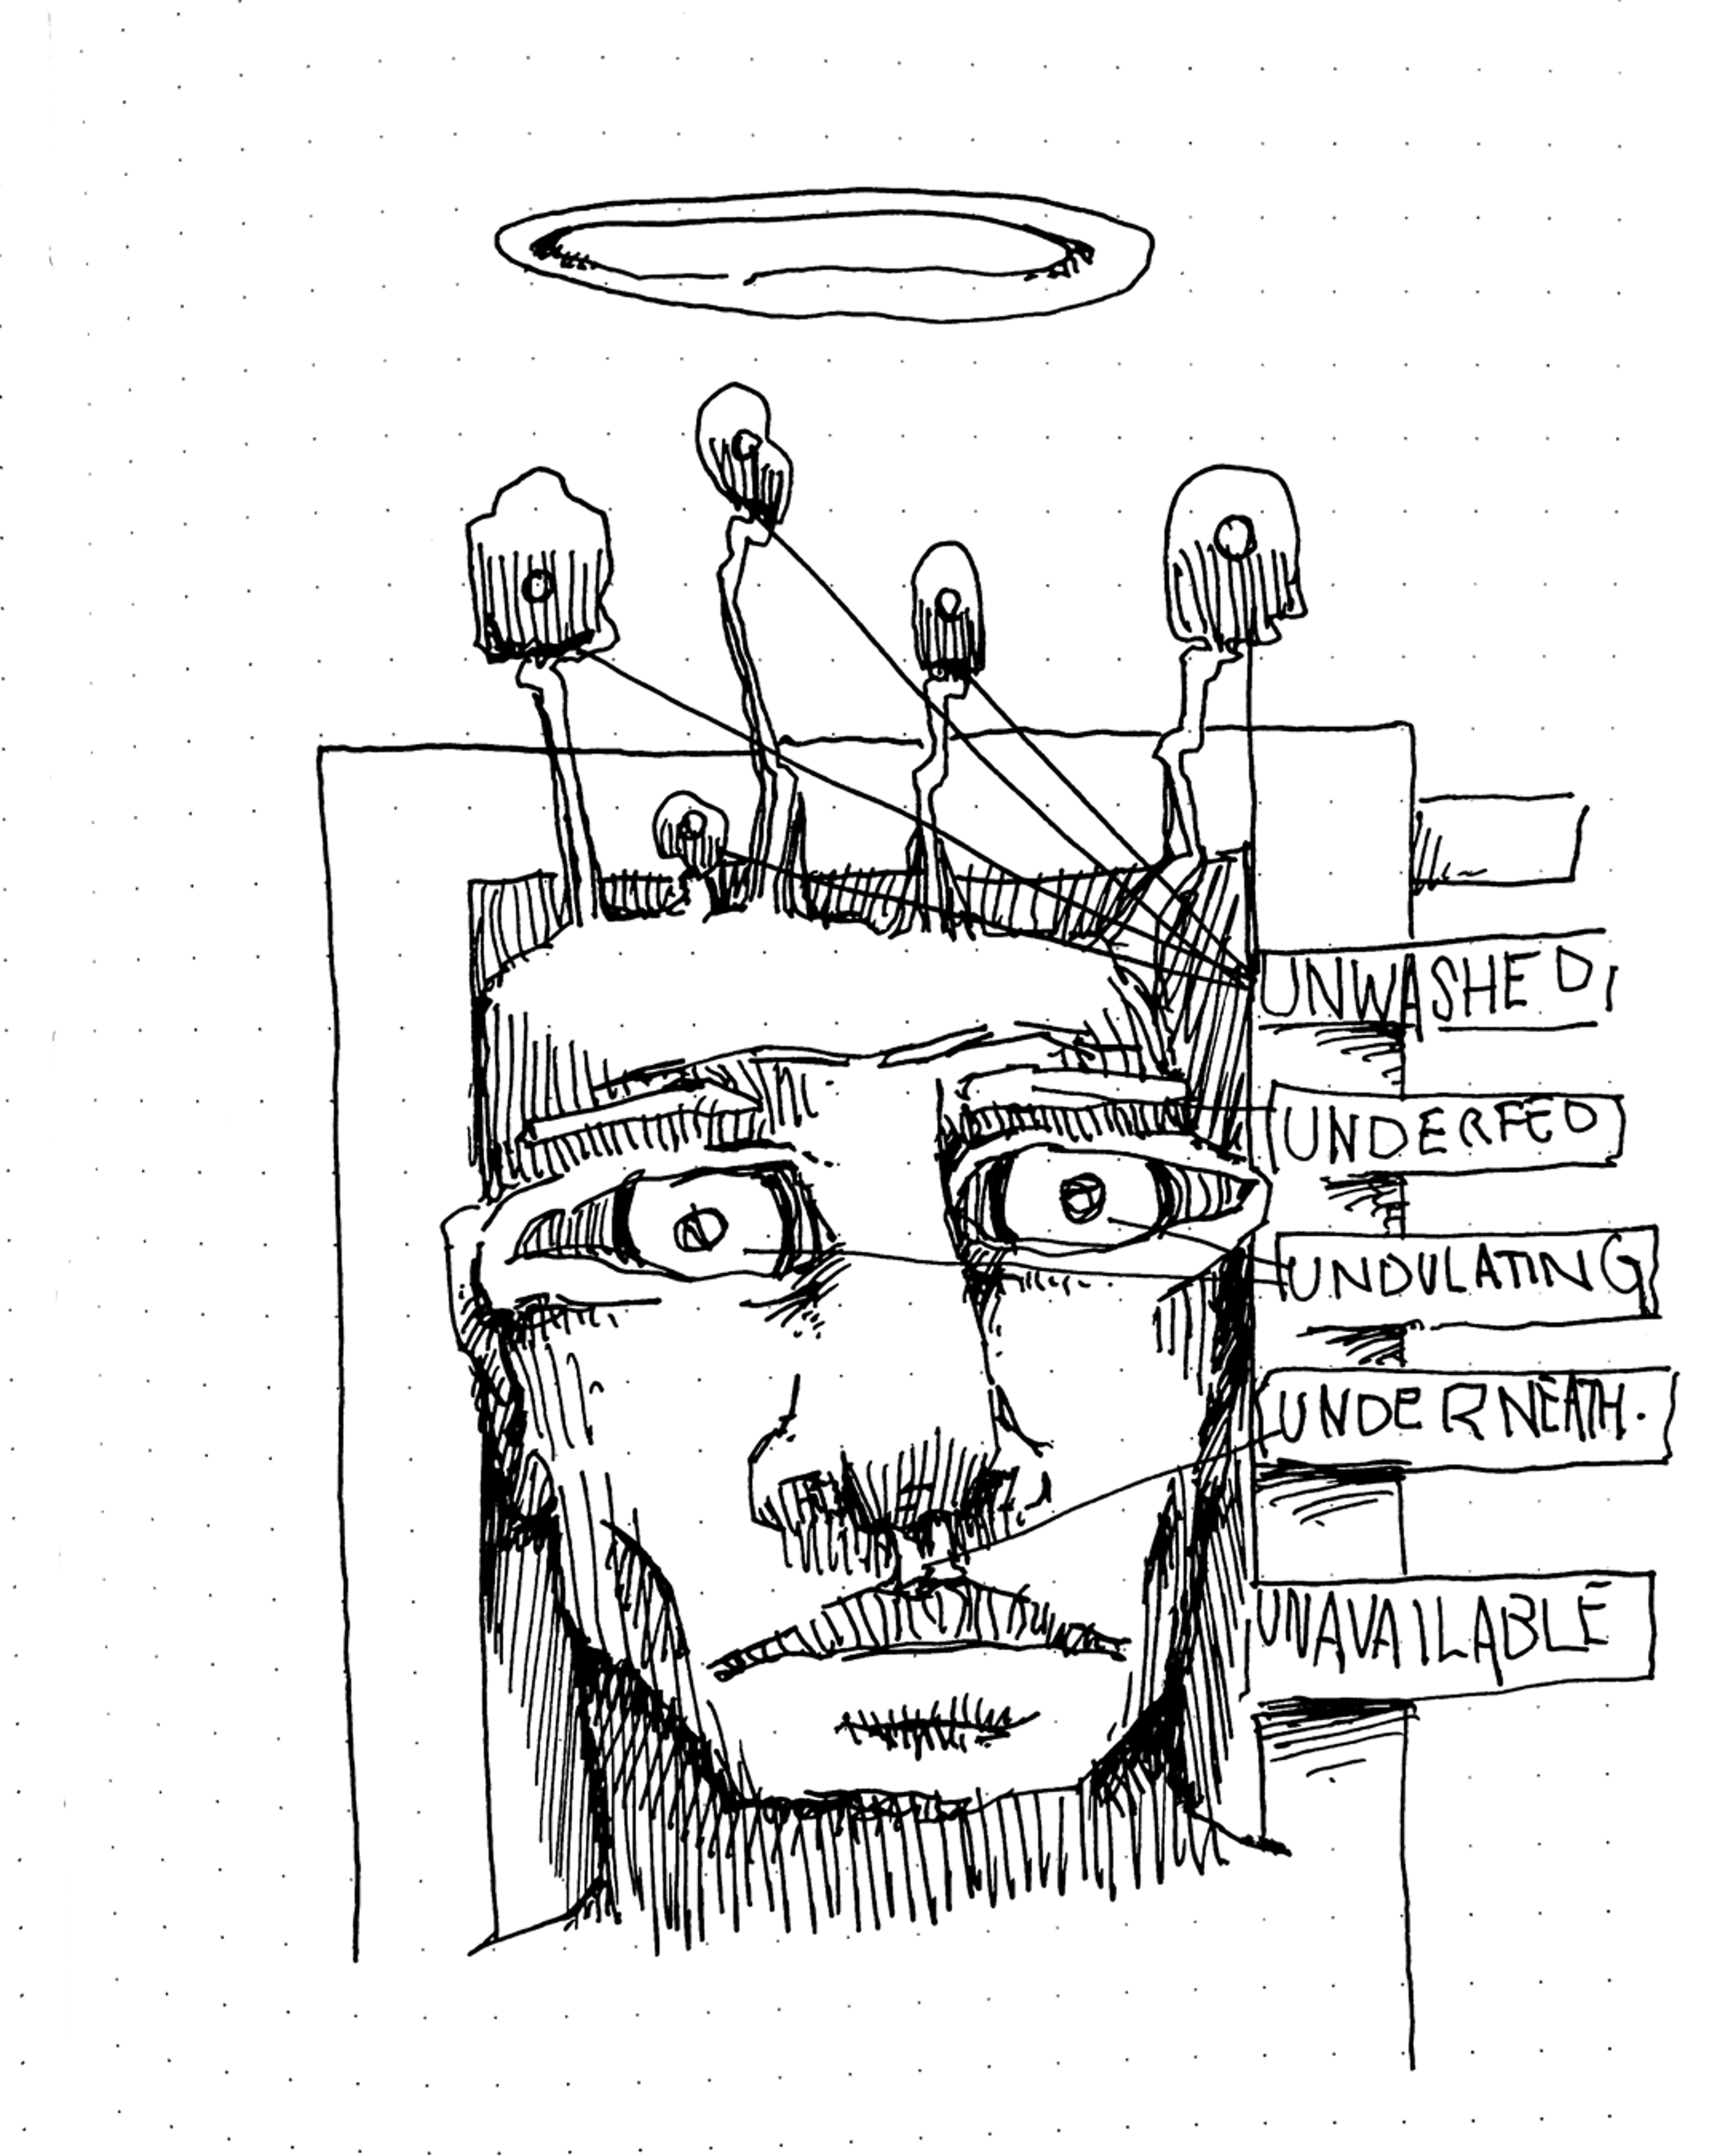 A sketched portrait of a contemplative face with an abstract halo overhead and disconnected words on the side, suggesting introspection.